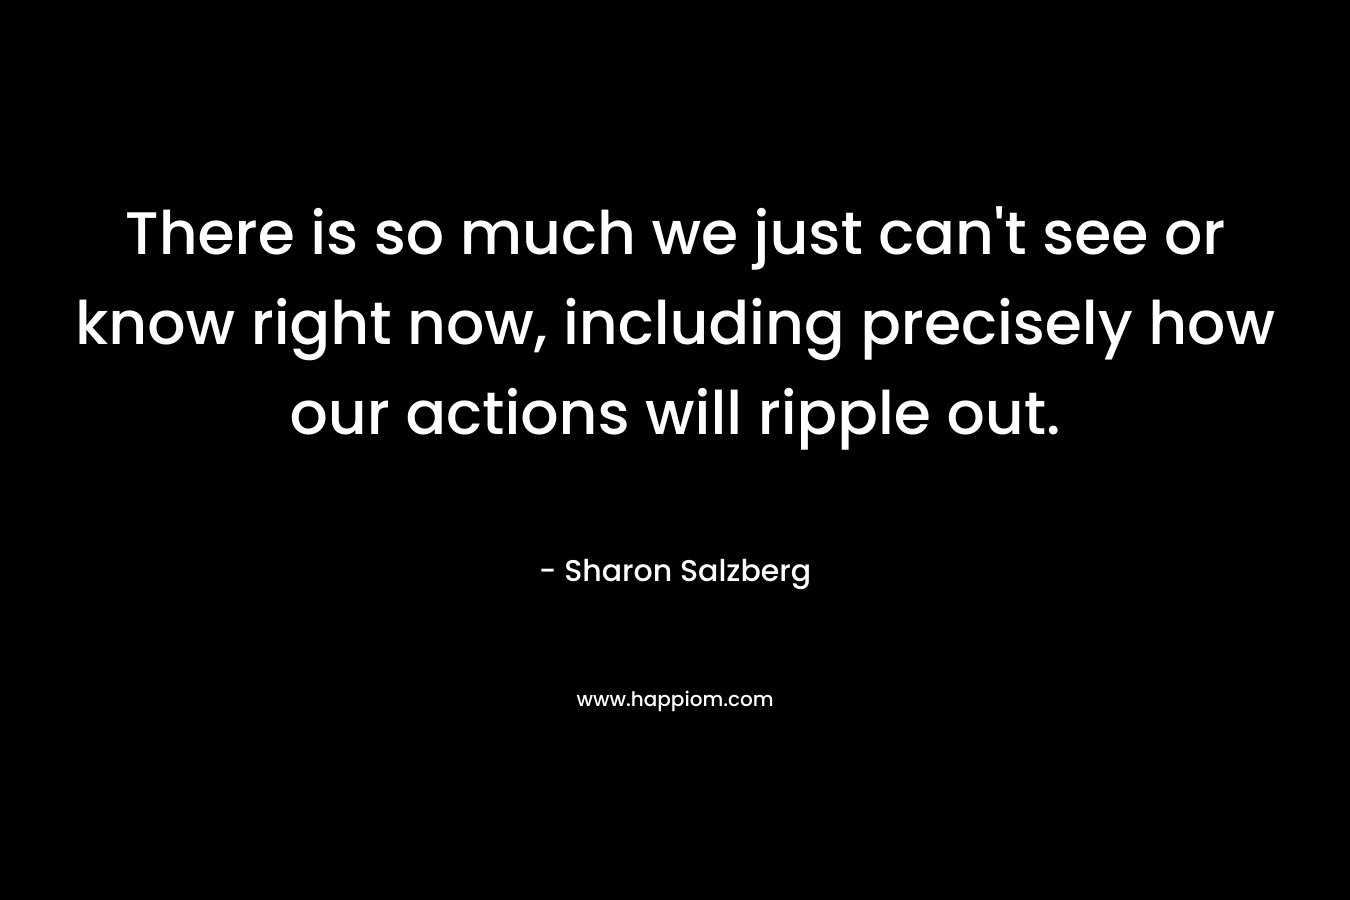 There is so much we just can't see or know right now, including precisely how our actions will ripple out.